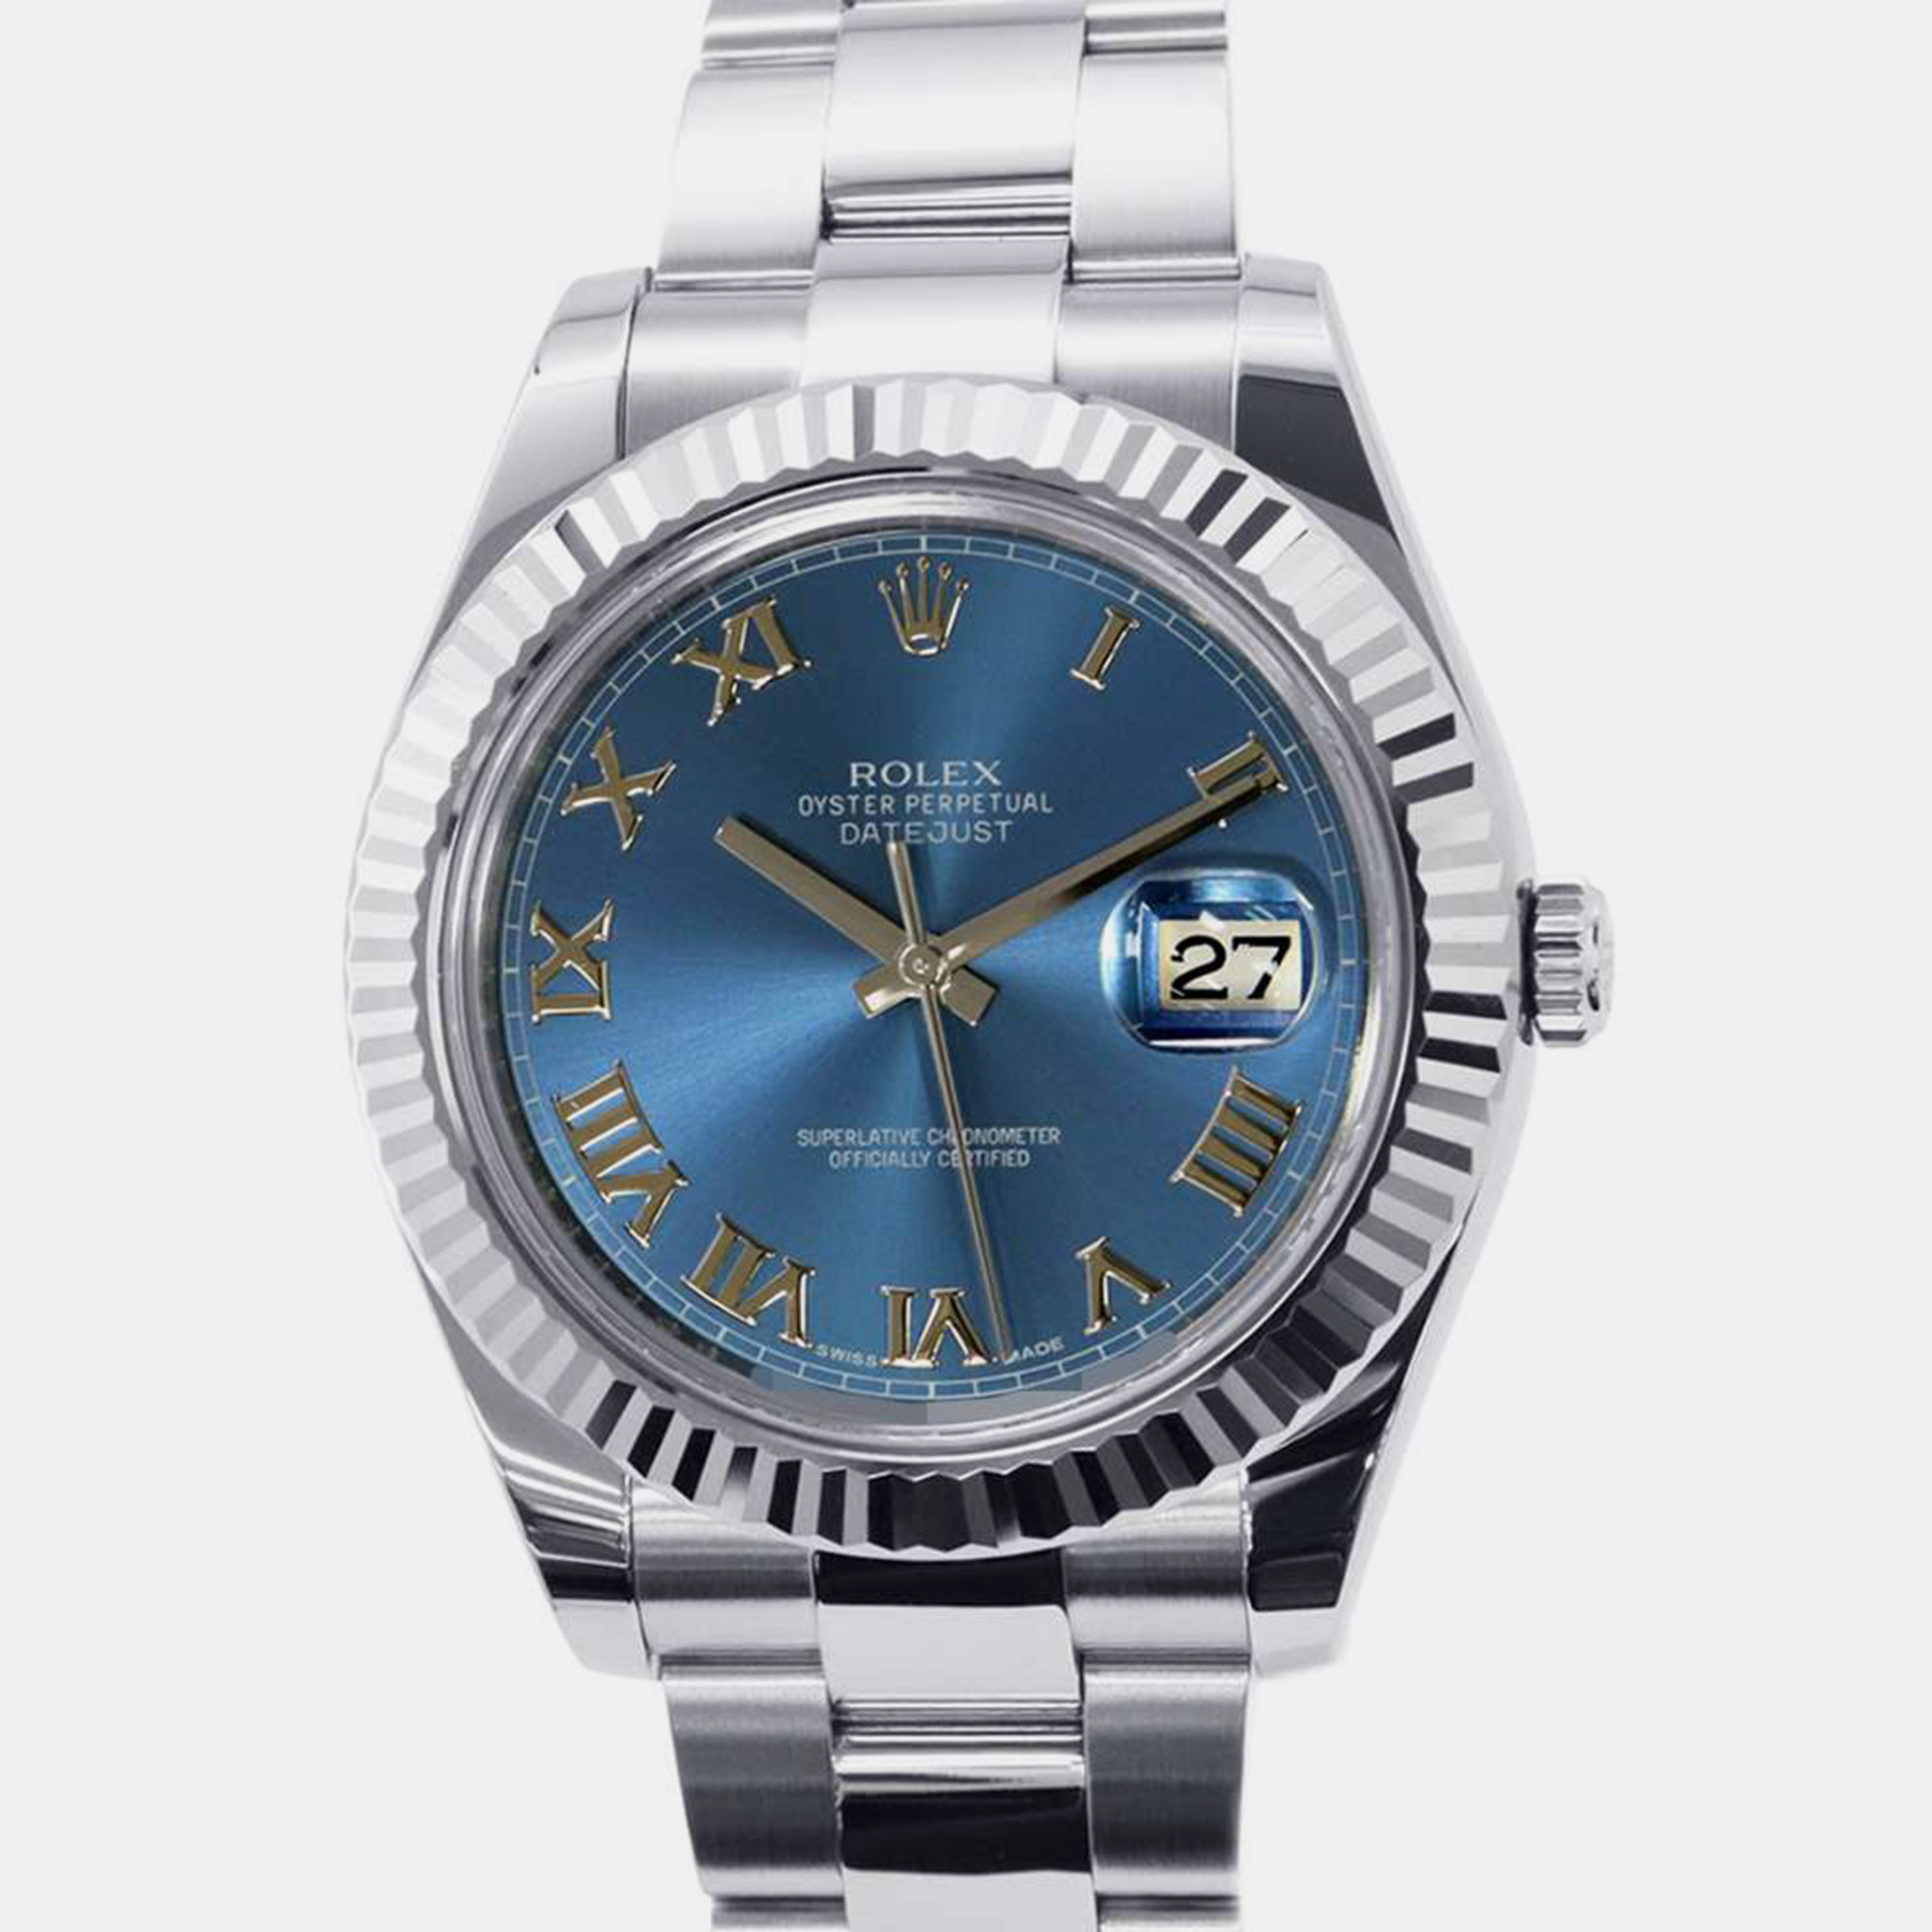 Rolex blue 18k white gold stainless steel datejust ii 116334 automatic men's wristwatch 41 mm